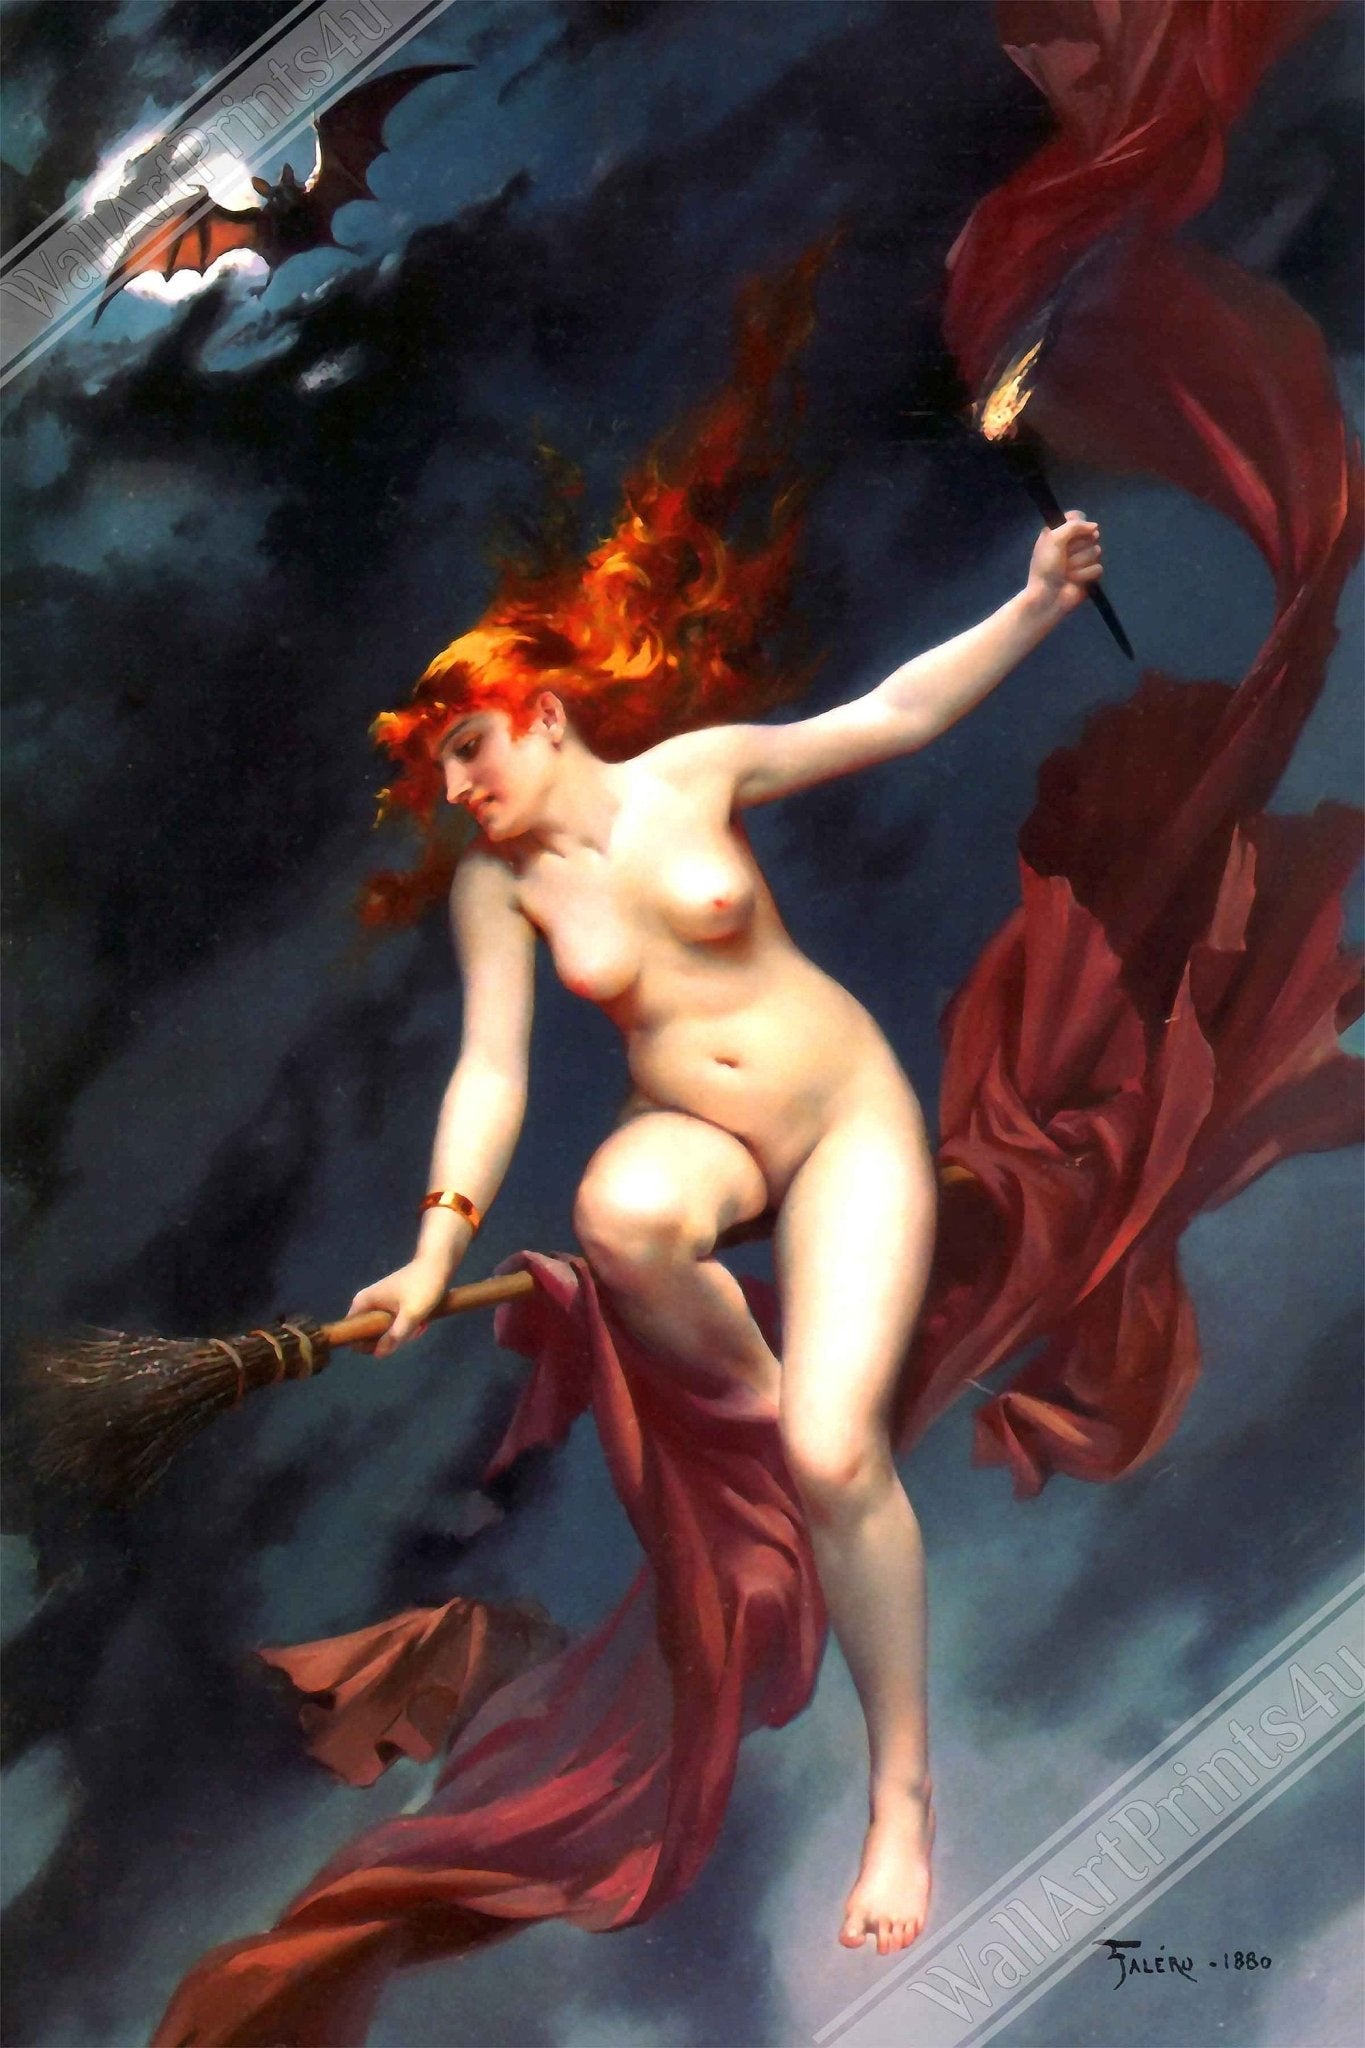 Witch Canvas - Naked Witch on A Broom Luis Ricardo Falero Canvas - Nude Witch On A Broomstick Canvas Print - WallArtPrints4U